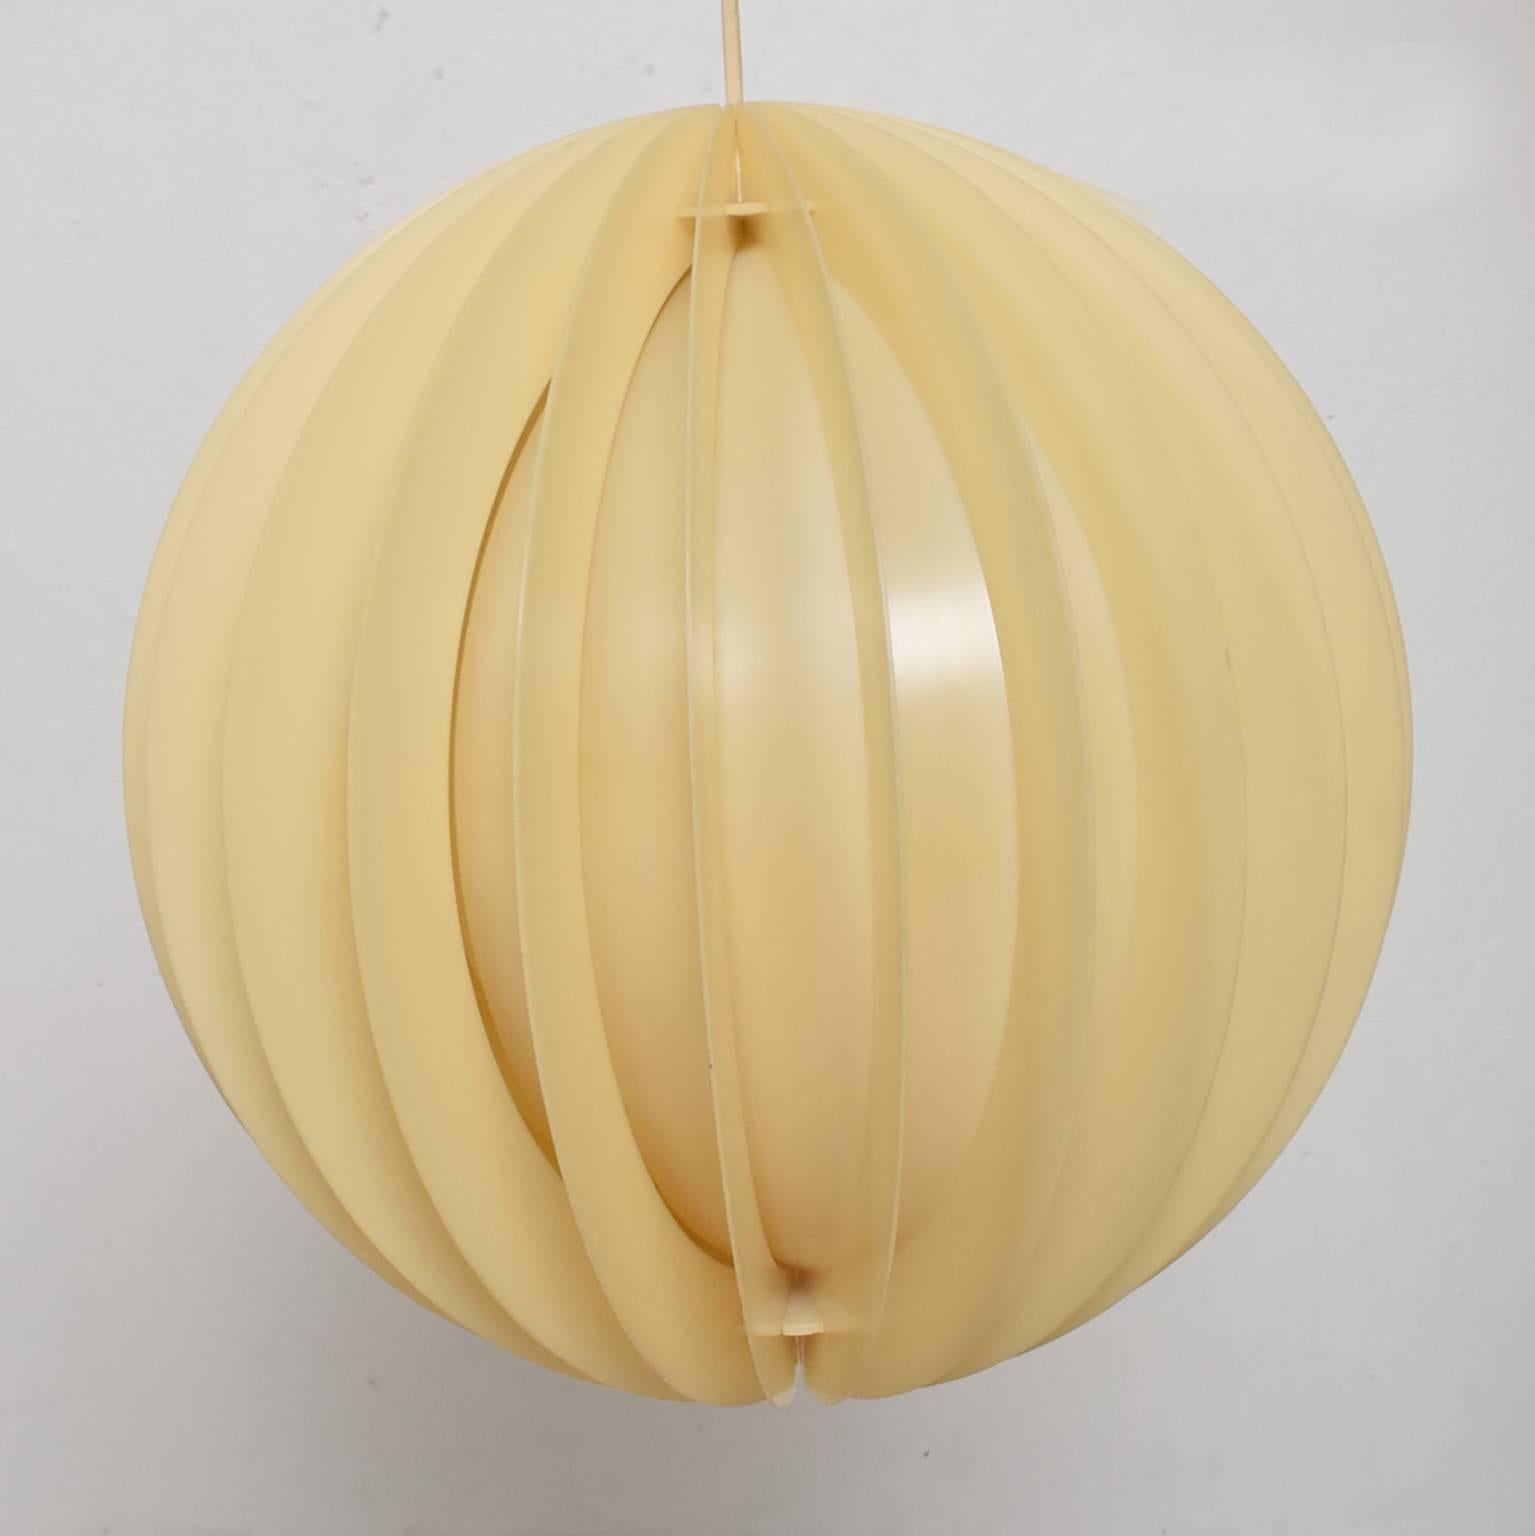 For your consideration, a Mid-Century Modern round pendant lighting plexiglass.
Vintage, color sun faded.
Dimensions: 16